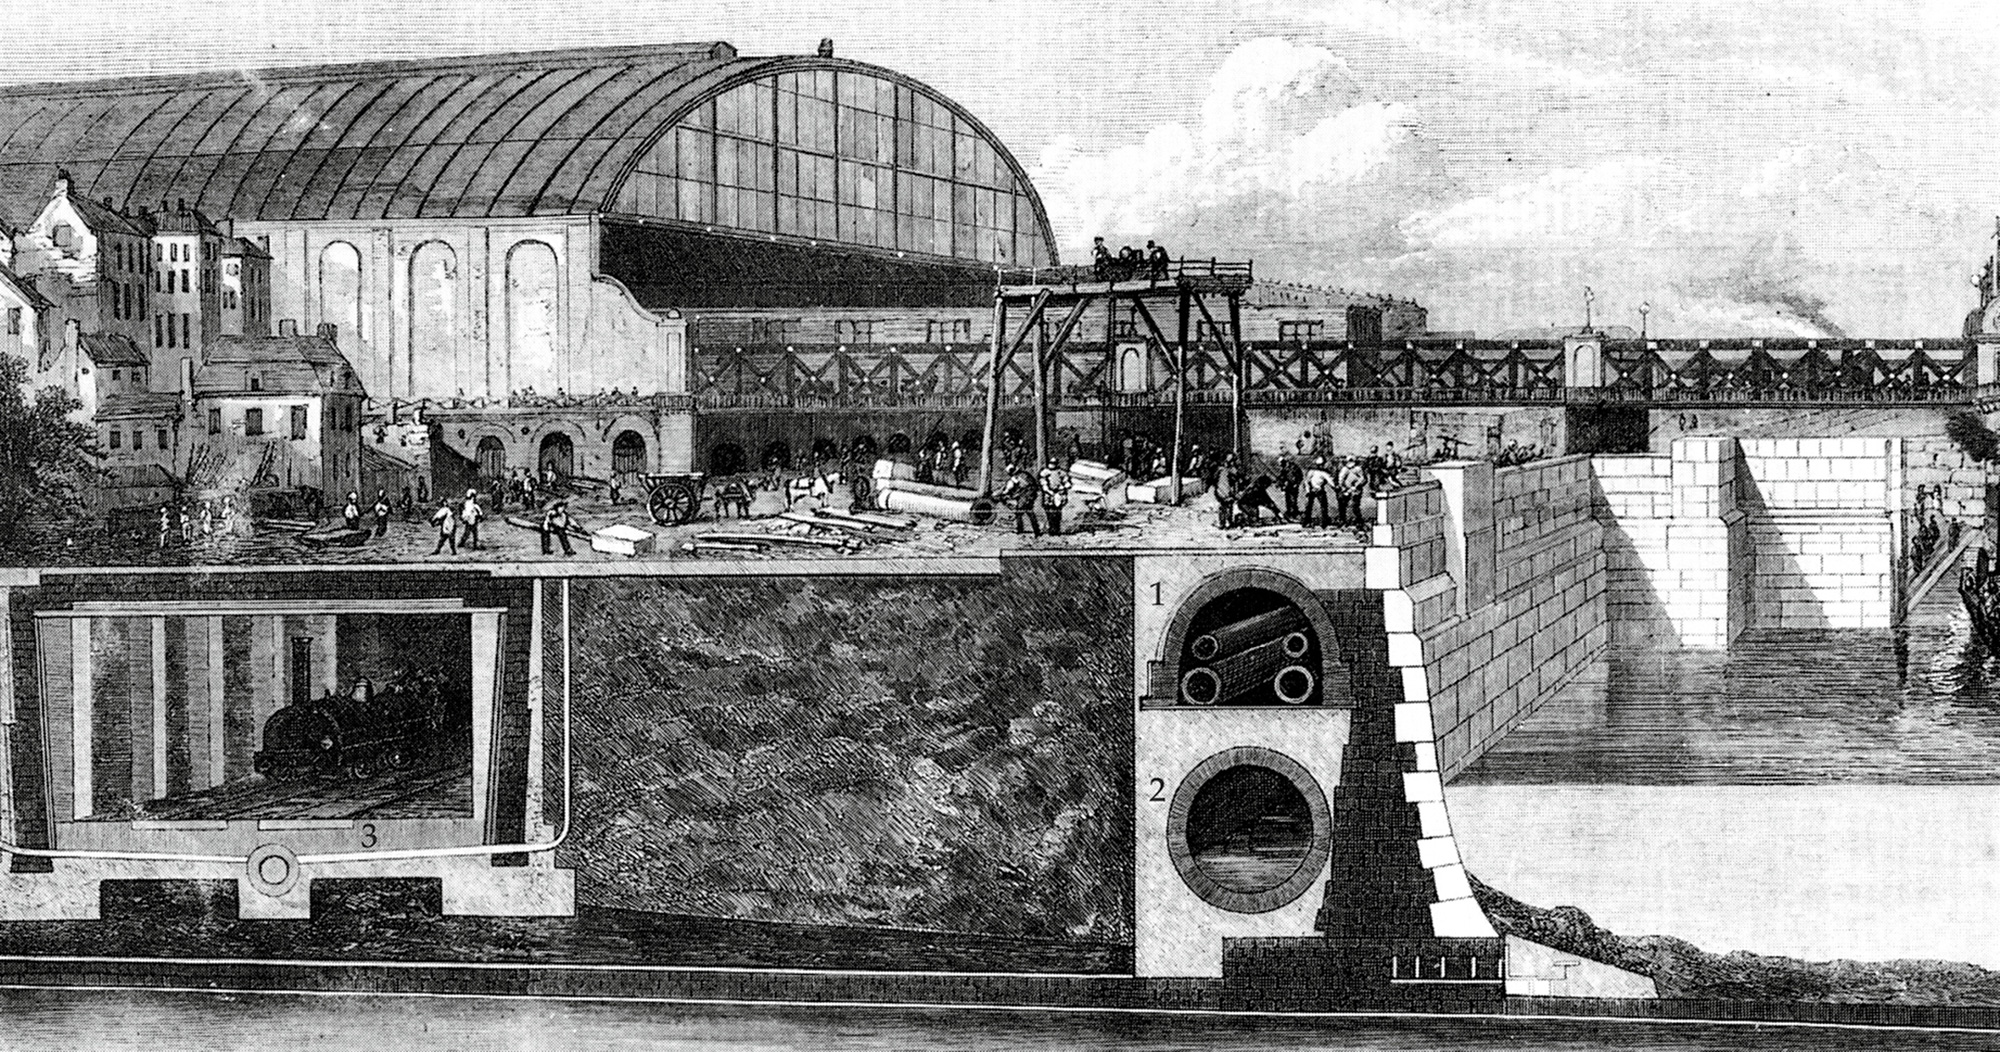 A diagram from the Illustrated London News, 22nd of June eighteen sixty-seven, depicting a section view of the Thames Embankment and London’s underground infrastructure. The illustration highlights the tunnel for the Metropolitan District Railway, Joseph Bazalgette’s sewer system, and a horizontal shaftway built to house gas and water pipes. 